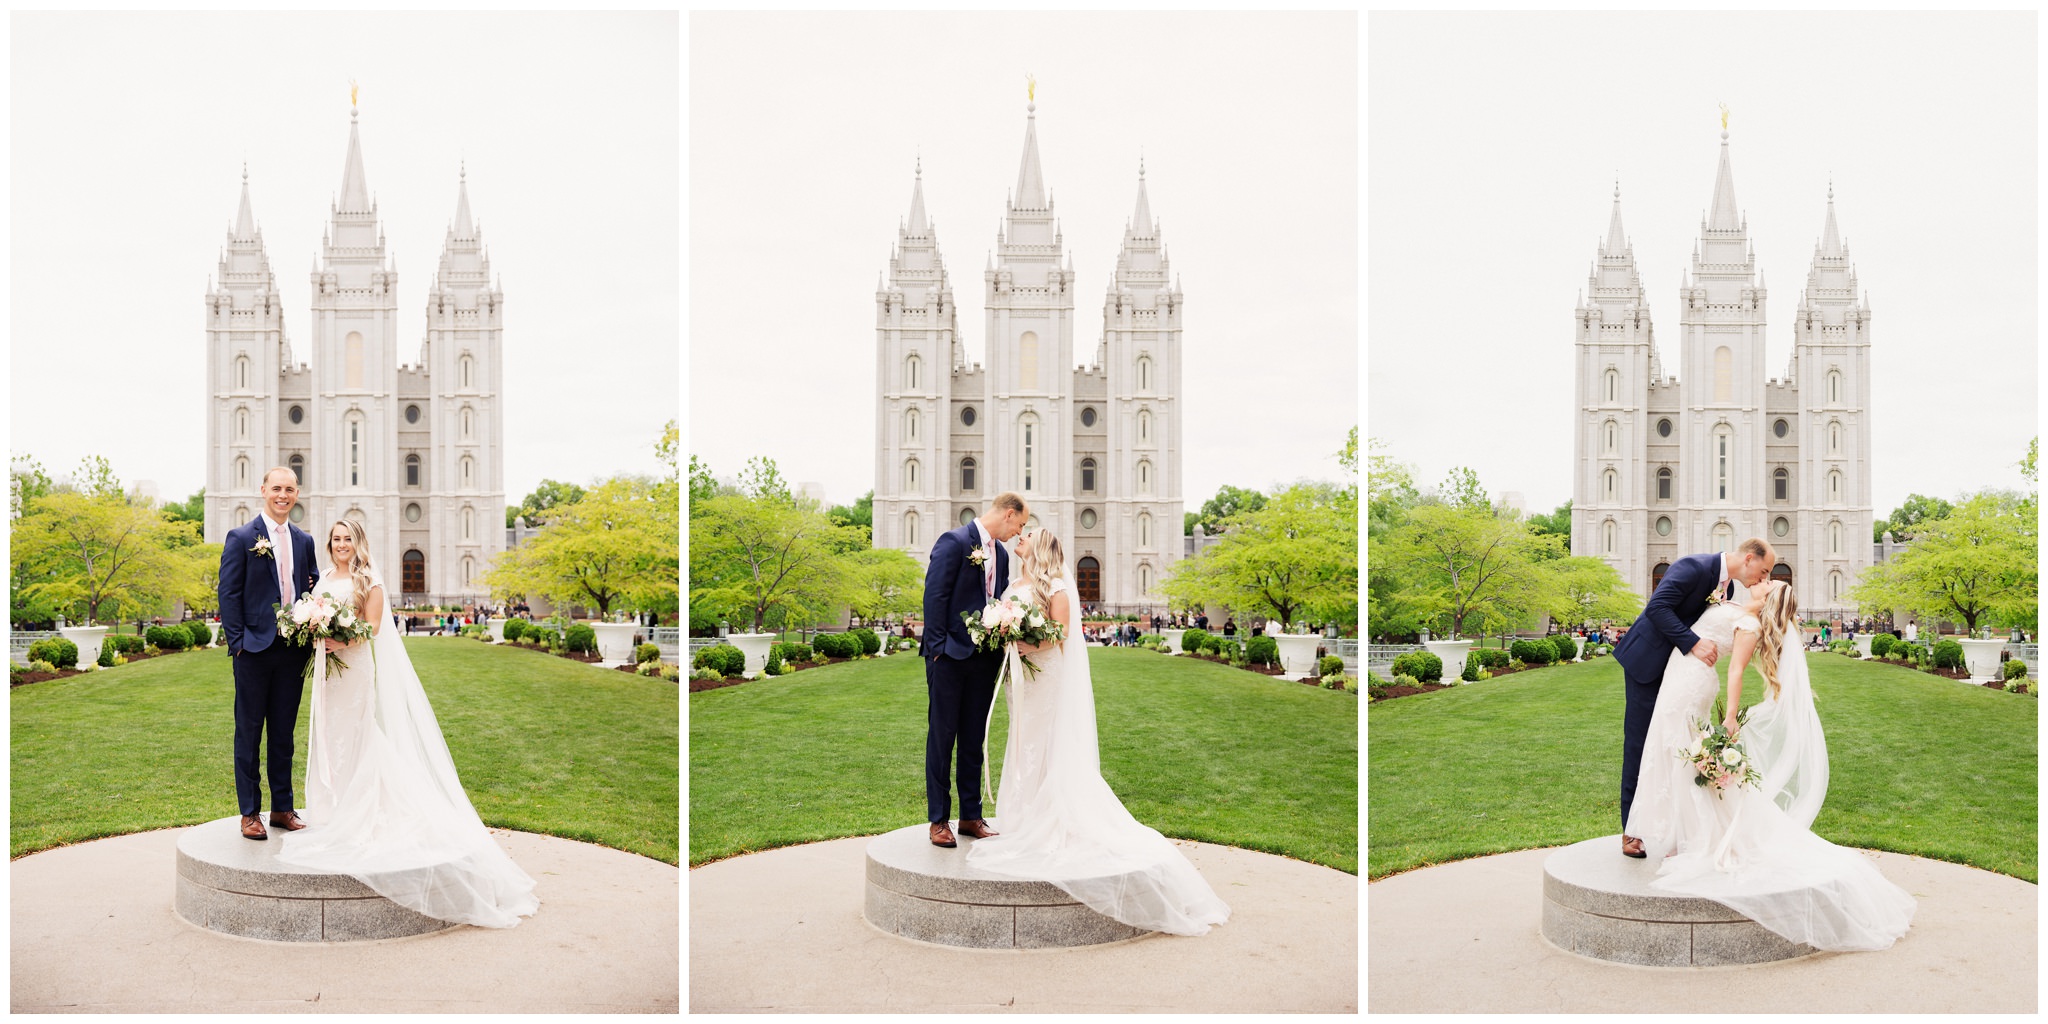 Salt Lake City temple wedding with bride and groom kissing